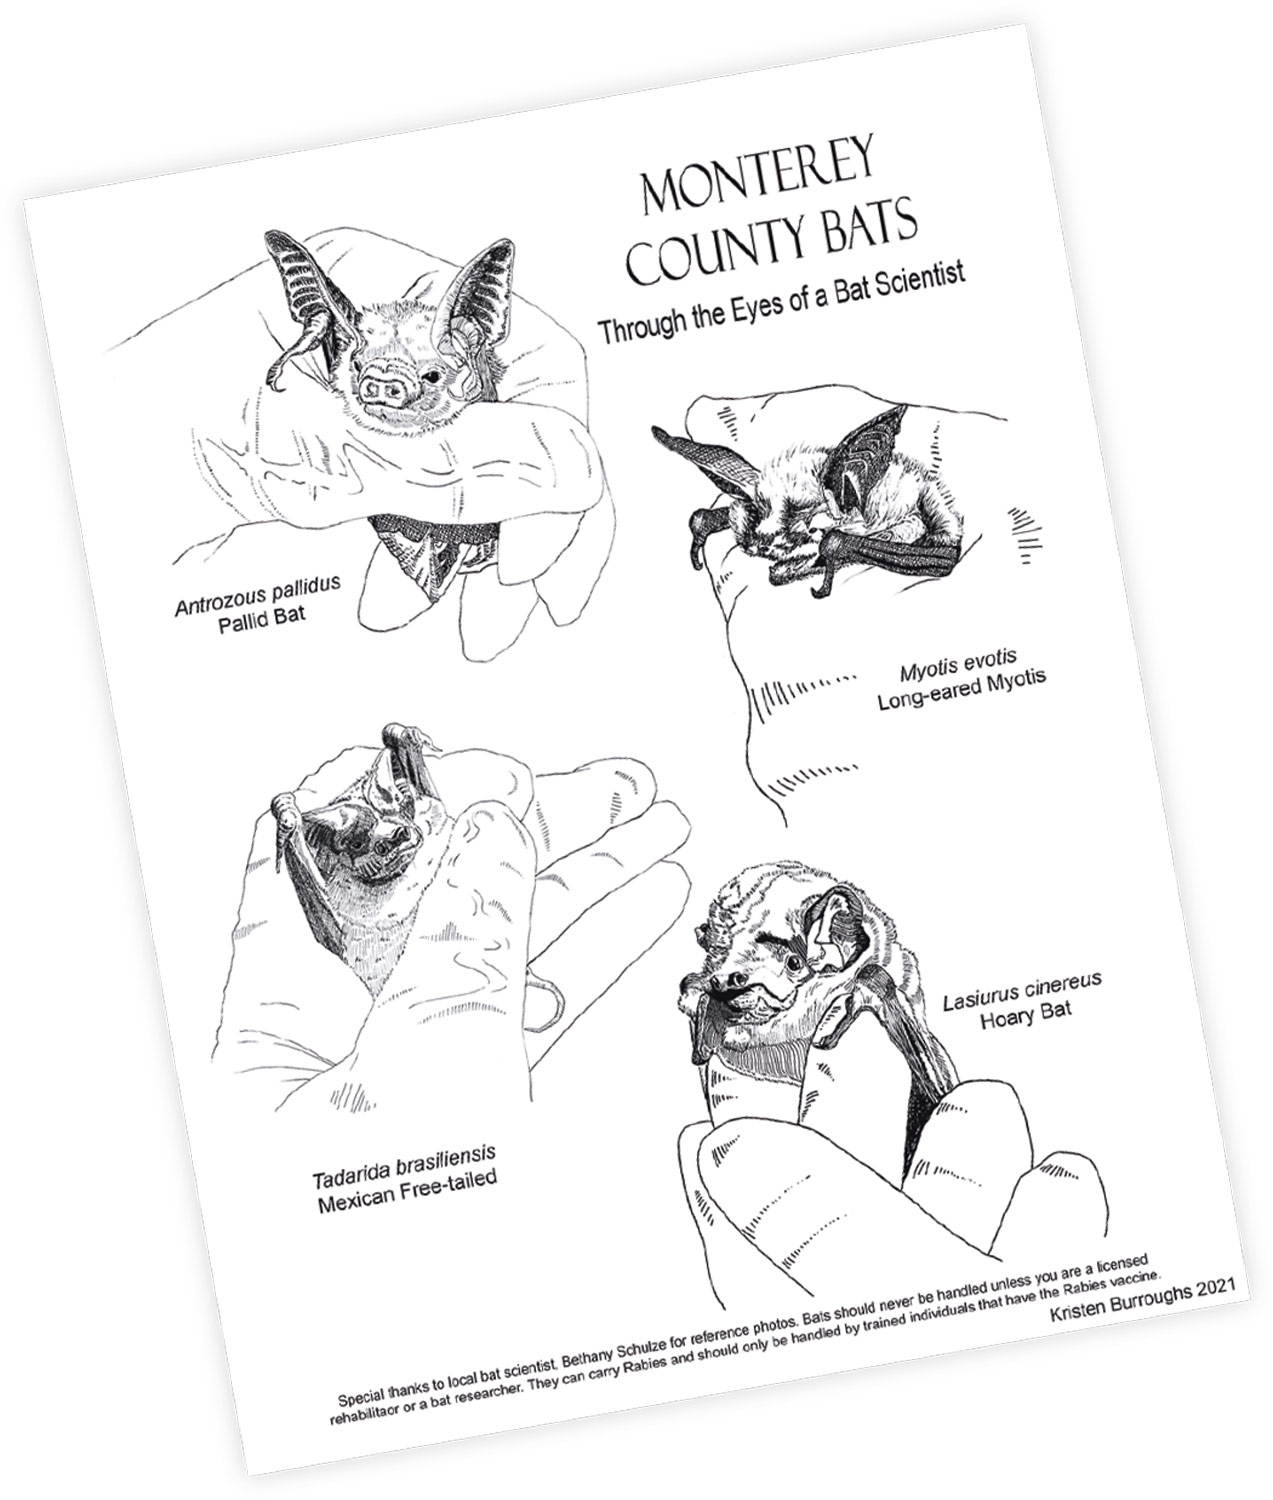 leaflet with illustrations of bats being held by gloved hands